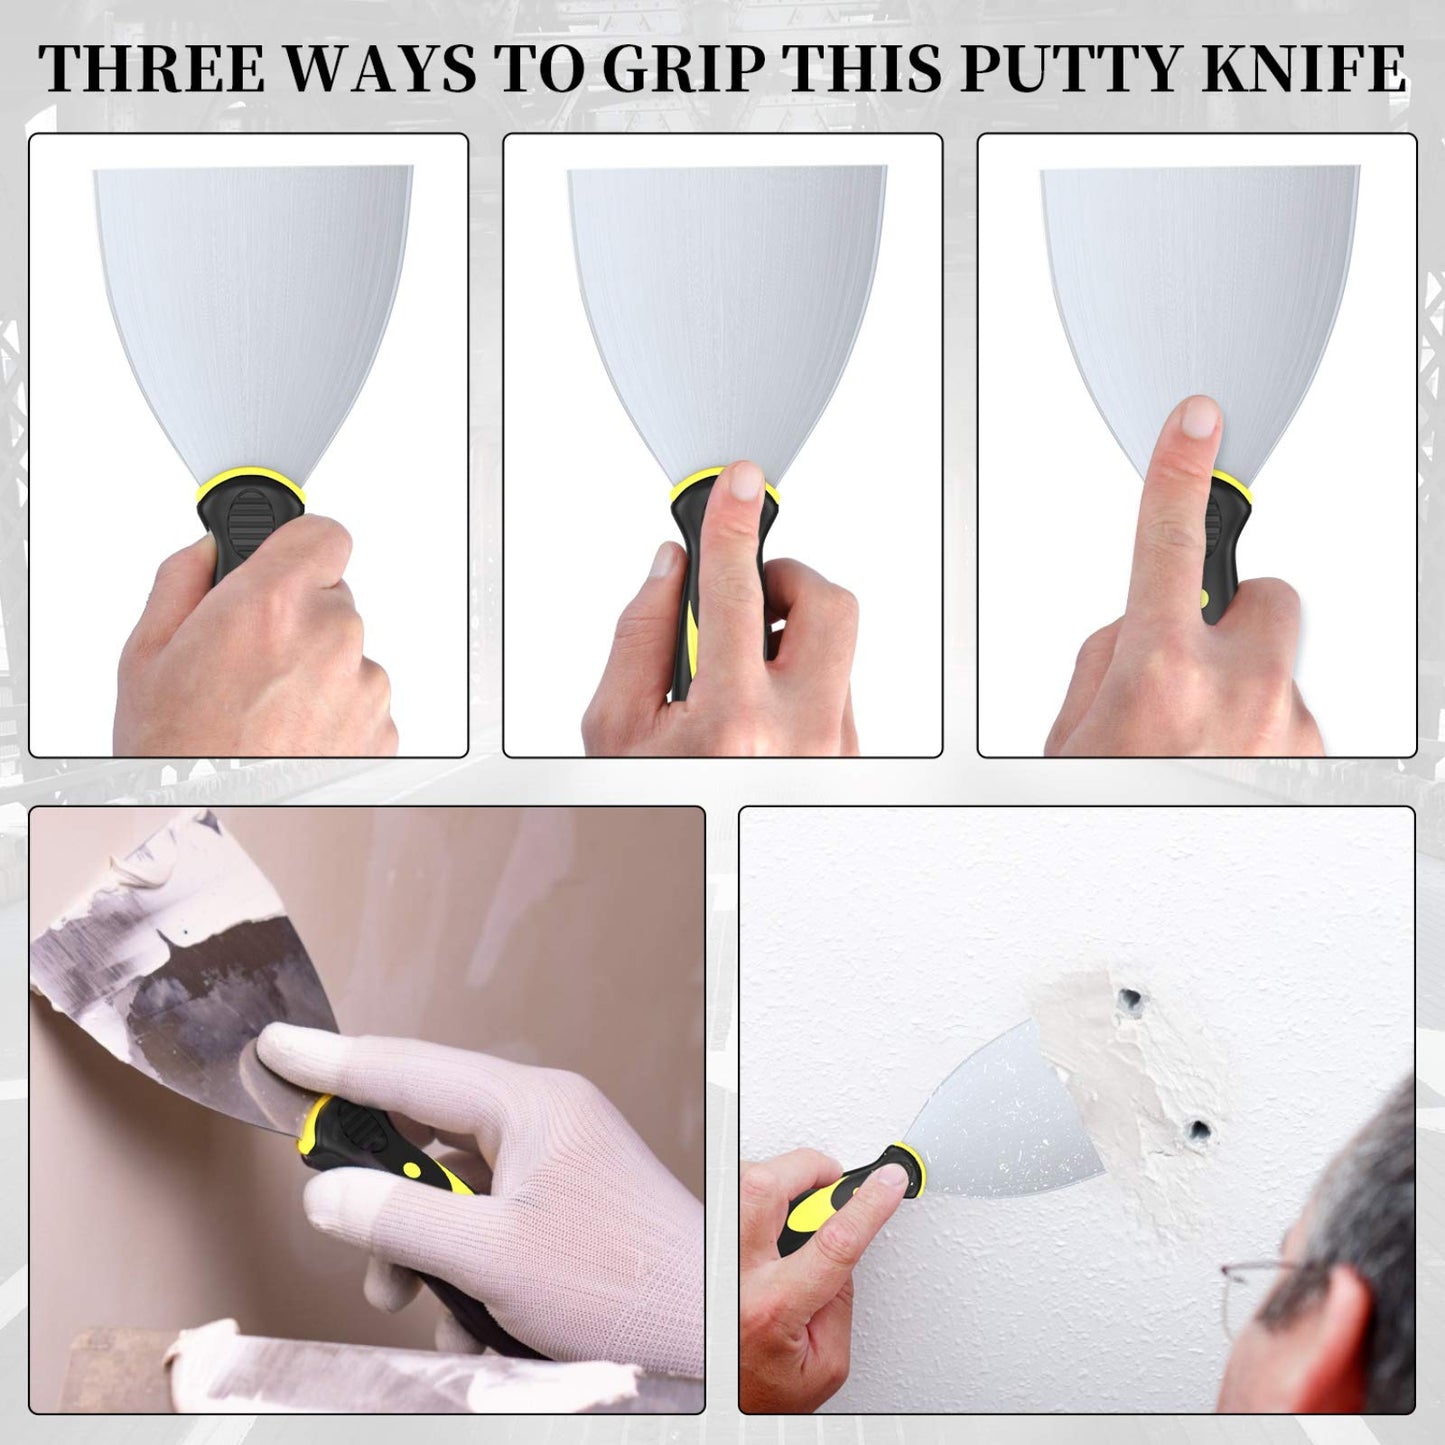 Putty Knife Scrapers, Spackle Knife, Metal Scraper Tool for Drywall Finishing, Plaster Scraping, Decals, and Wallpaper(3 Pack,1.5, 3, 4 Inch)